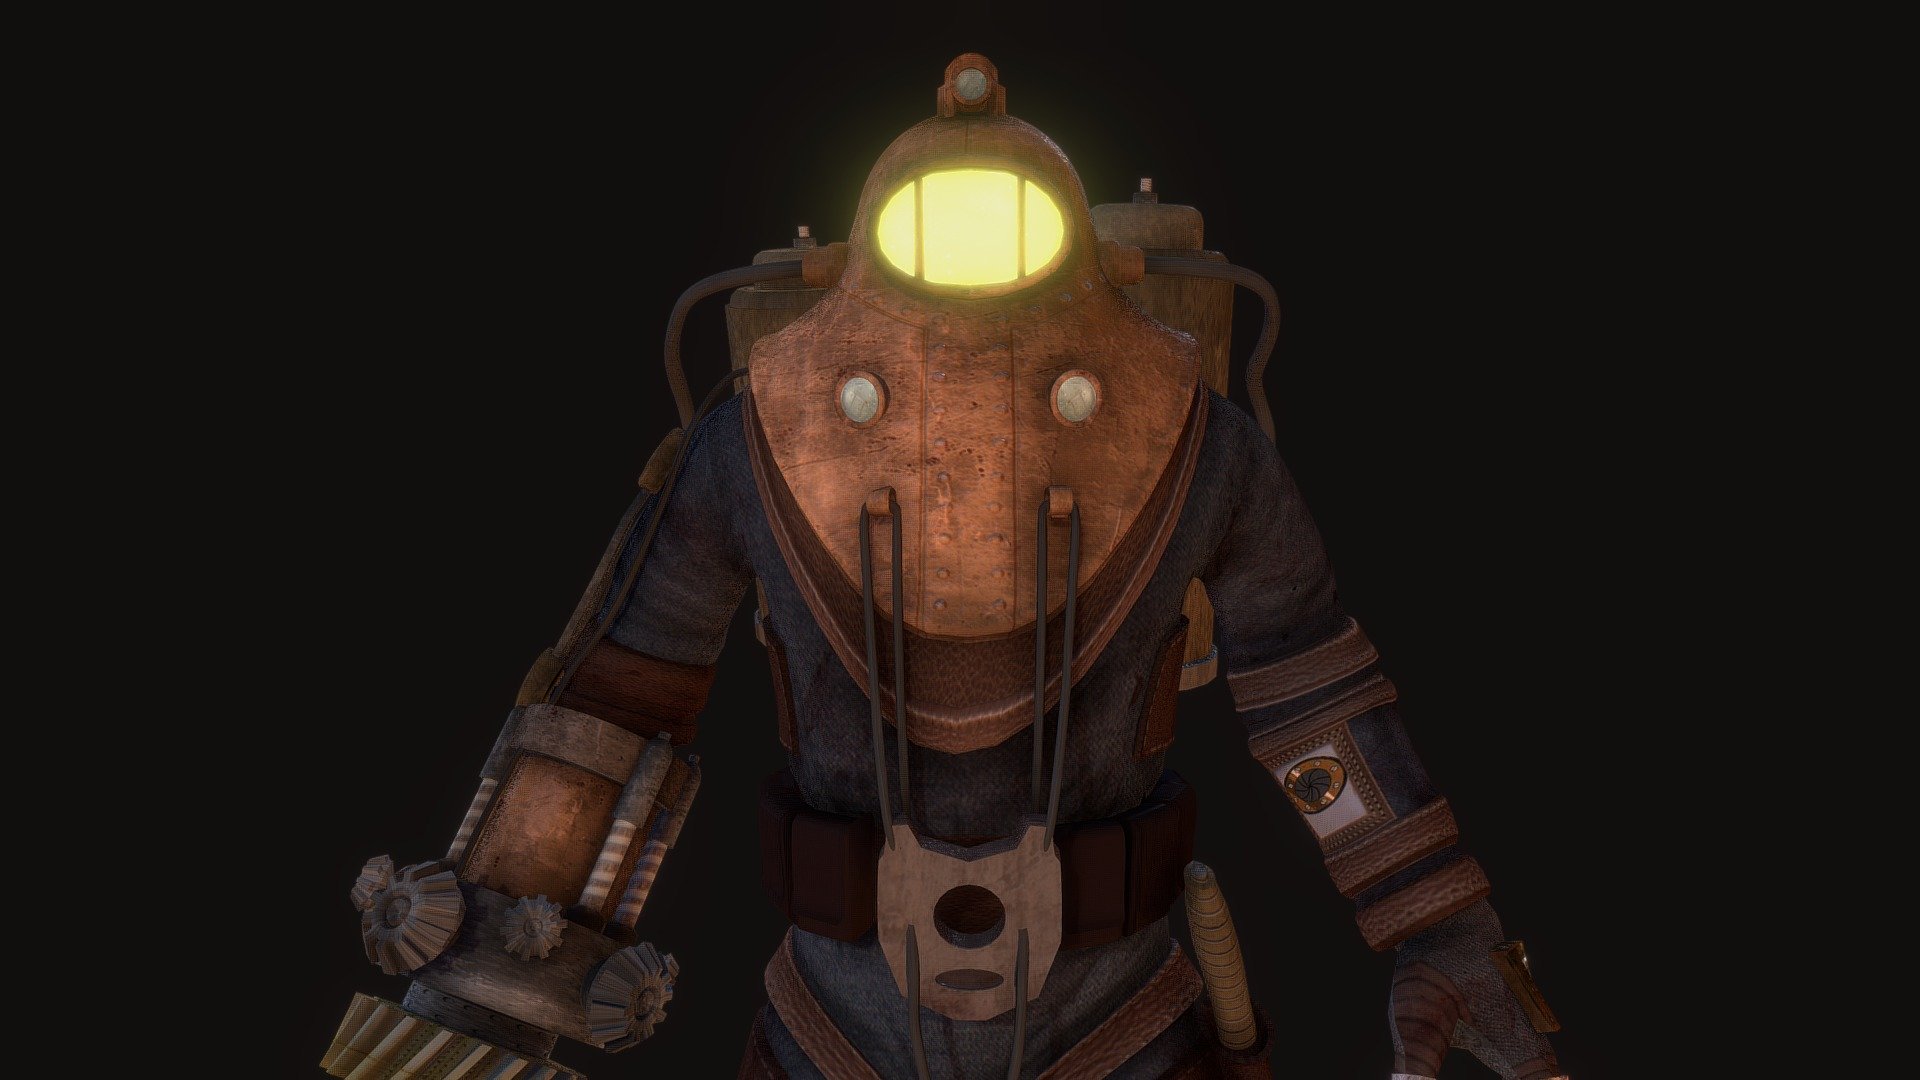 3D model of the main character of Bioshock2 : Subject Delta, an old design of the wellknown &ldquo;Big Daddy